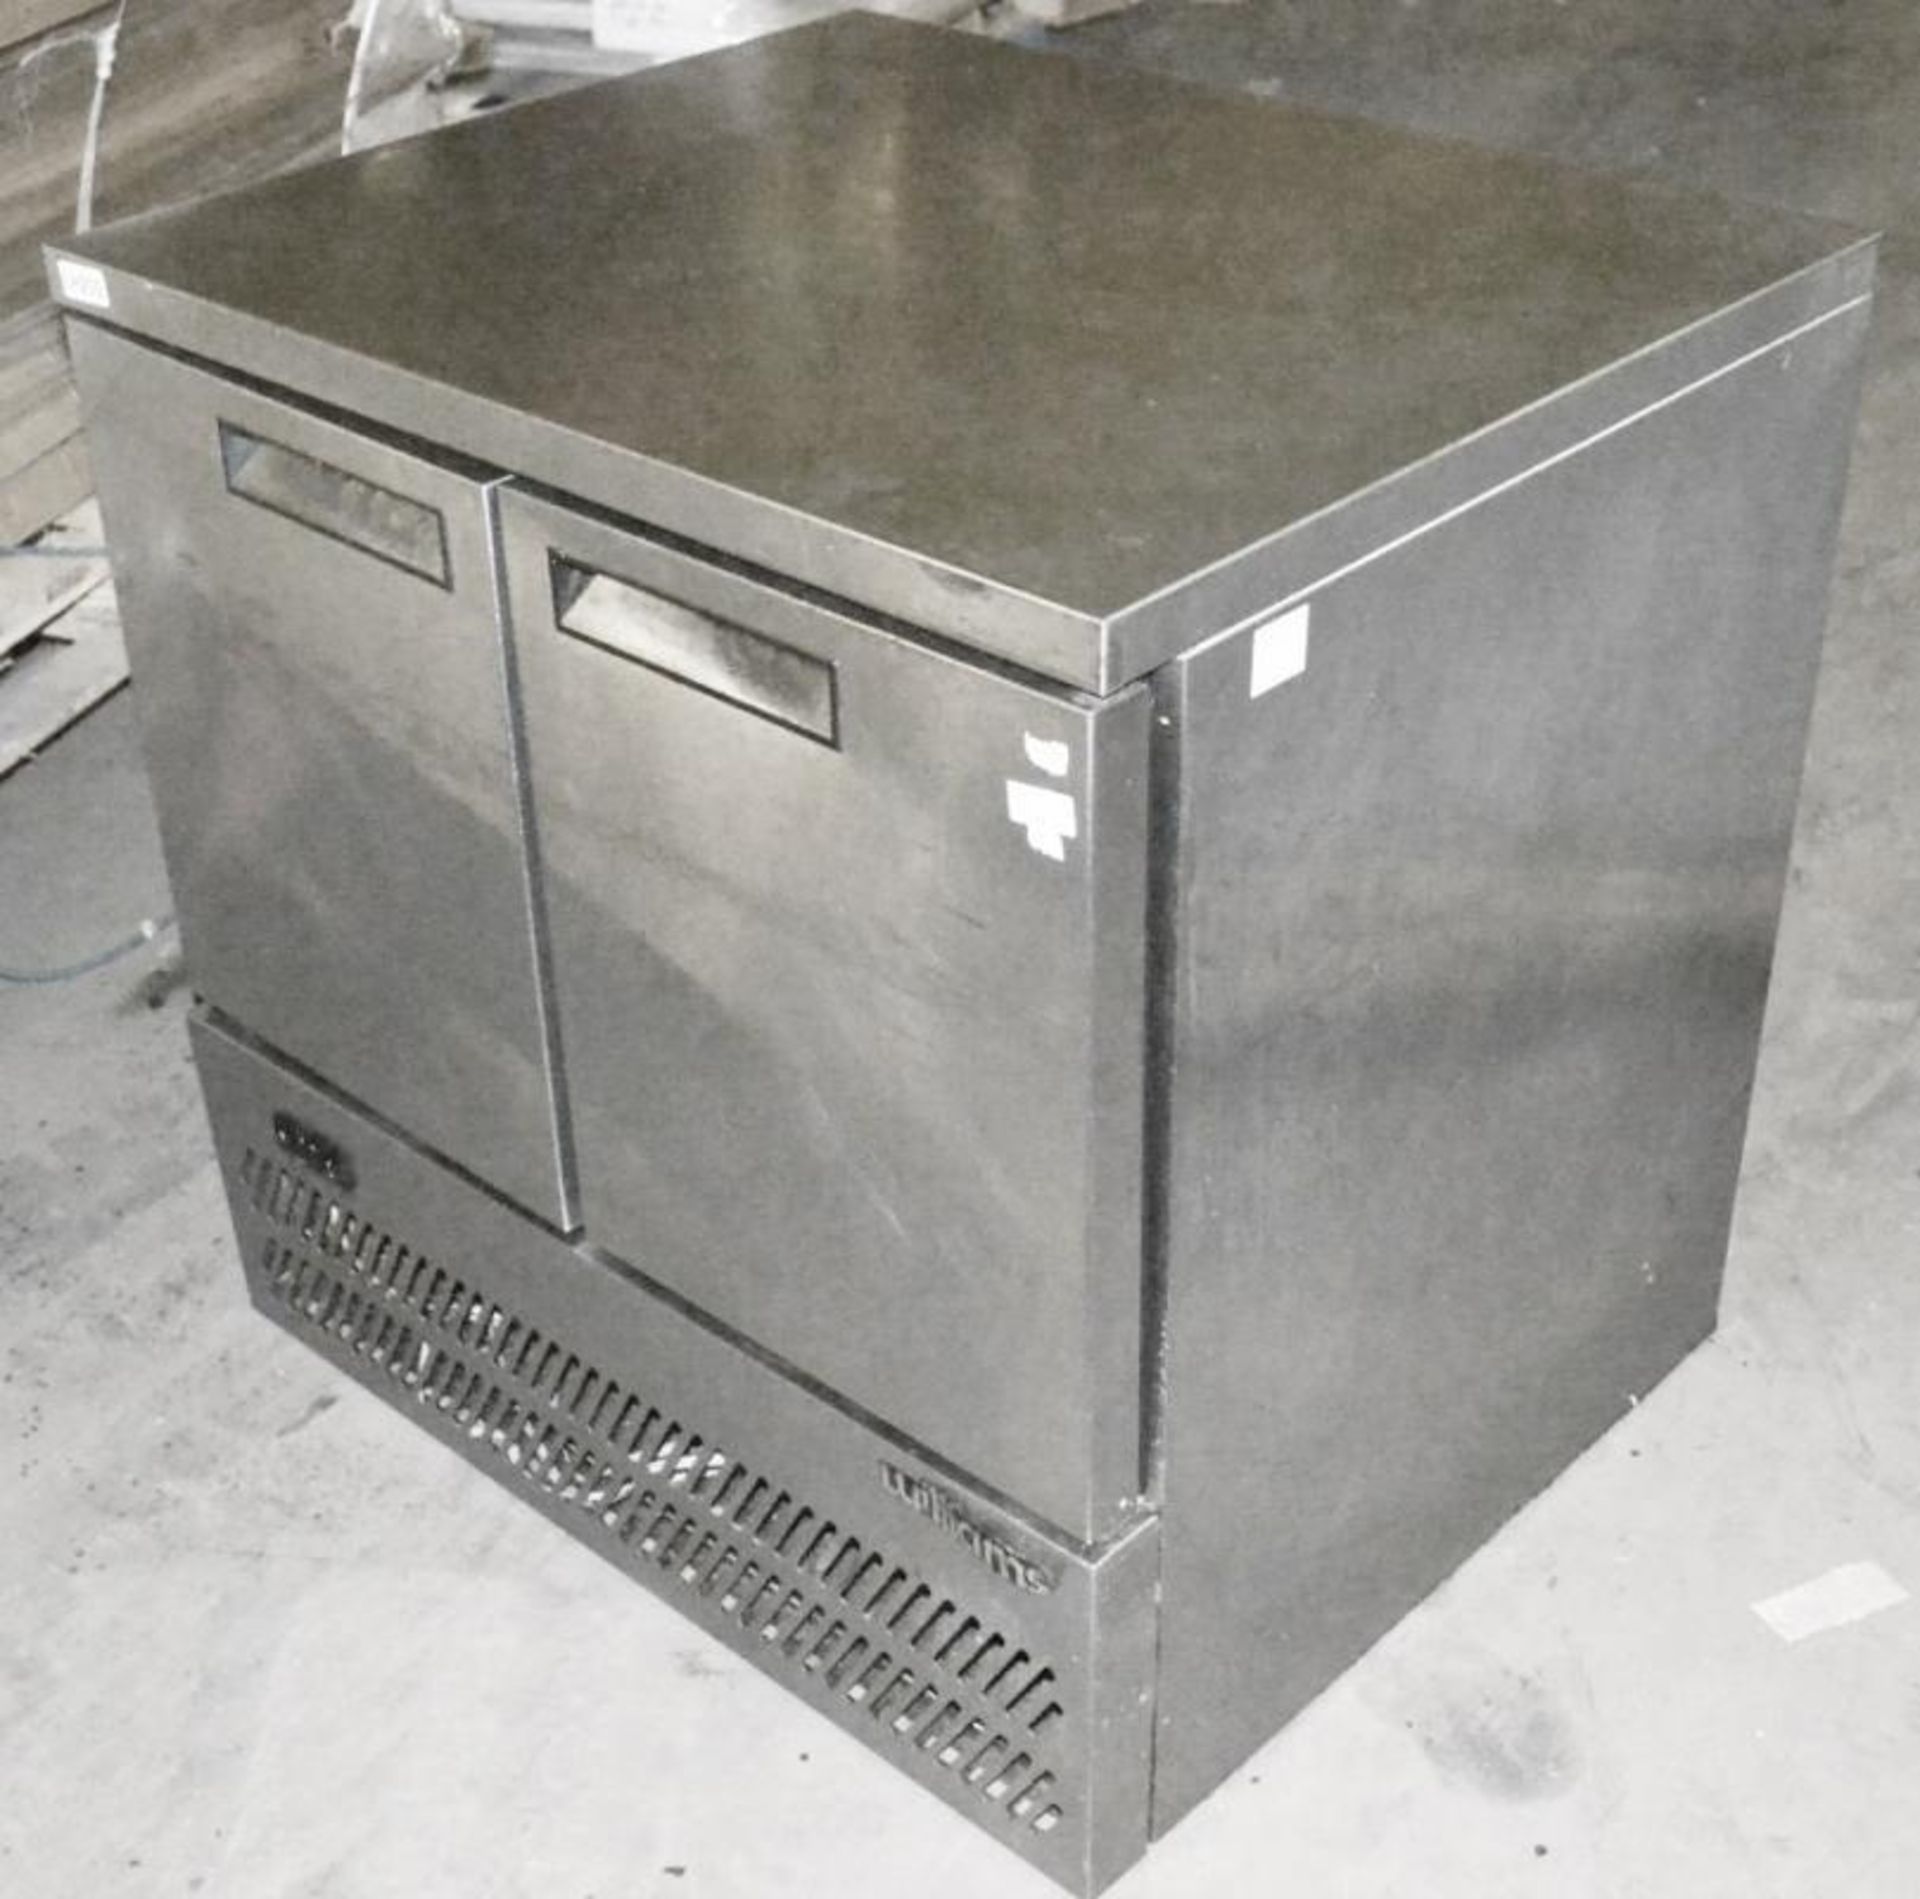 1 x Stainless Steel Commercial Two Door Hot Cupboard - Dimensions: 85 x W86 x D73cm - CL256 - Ref: L - Image 3 of 4